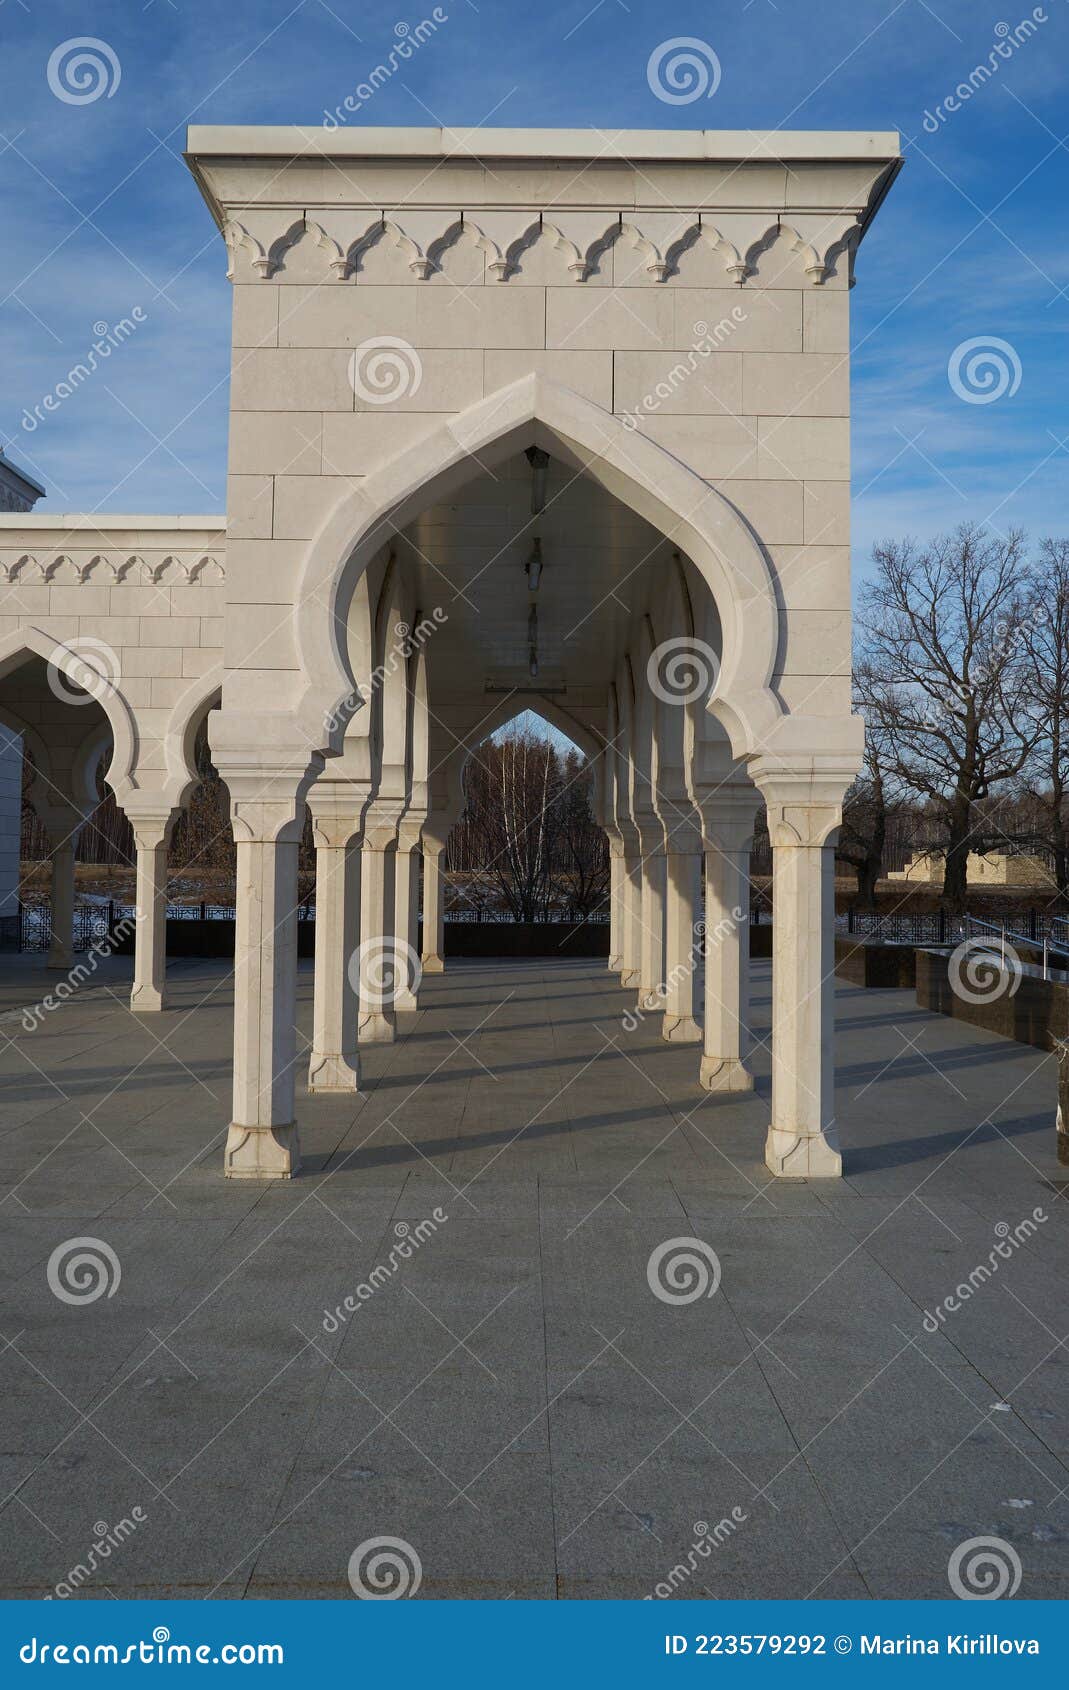 The Arch in the Islamic Mosque Stock Photo - Image of muslim, elegance ...